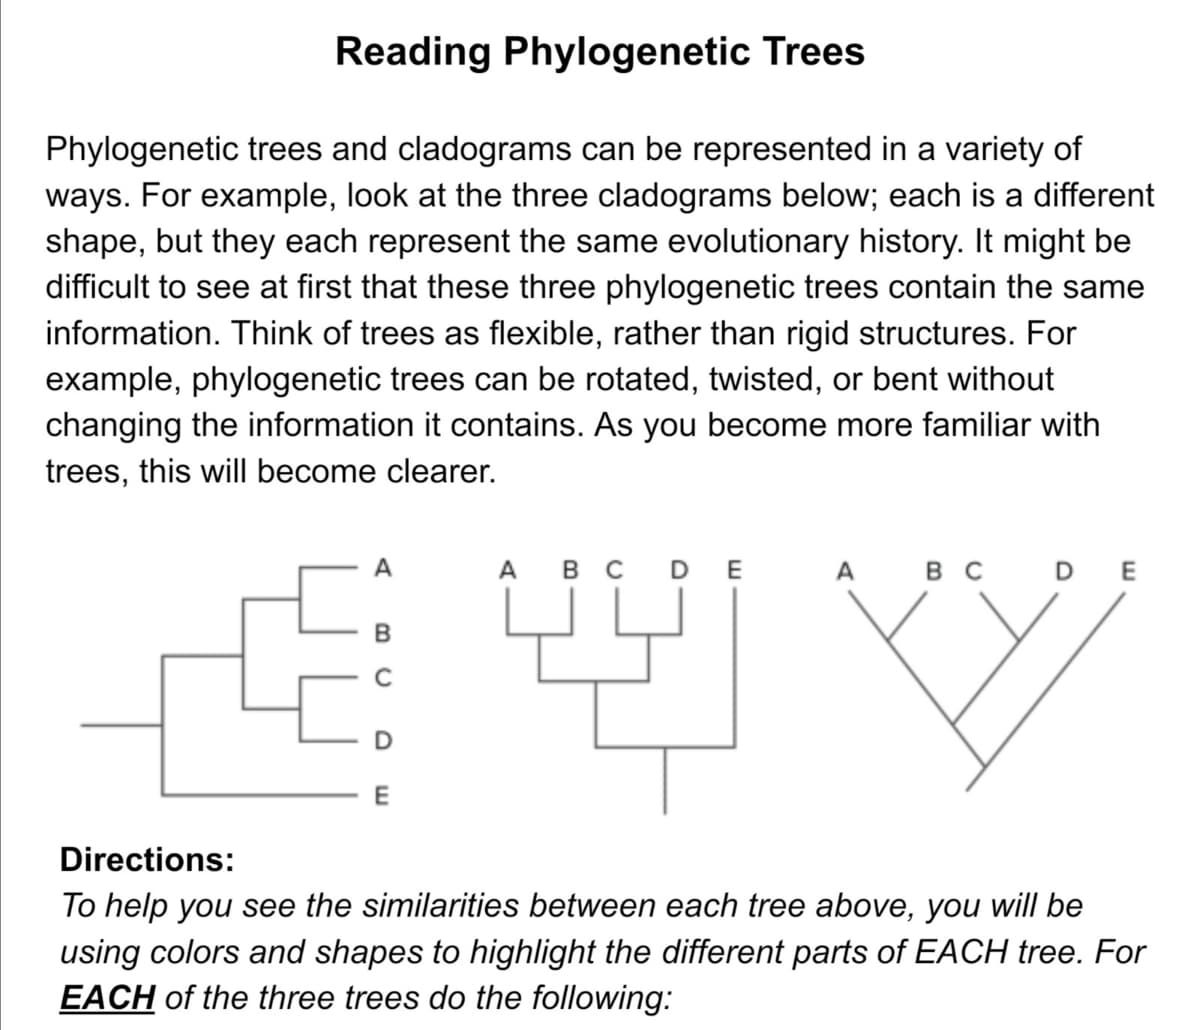 Reading Phylogenetic Trees
Phylogenetic trees and cladograms can be represented in a variety of
ways. For example, look at the three cladograms below; each is a different
shape, but they each represent the same evolutionary history. It might be
difficult to see at first that these three phylogenetic trees contain the same
information. Think of trees as flexible, rather than rigid structures. For
example, phylogenetic trees can be rotated, twisted, or bent without
changing the information it contains. As you become more familiar with
trees, this will become clearer.
A
А вс DE
A
вс D Е
E
Directions:
To help you see the similarities between each tree above, you will be
using colors and shapes to highlight the different parts of EACH tree. For
EACH of the three trees do the following:
